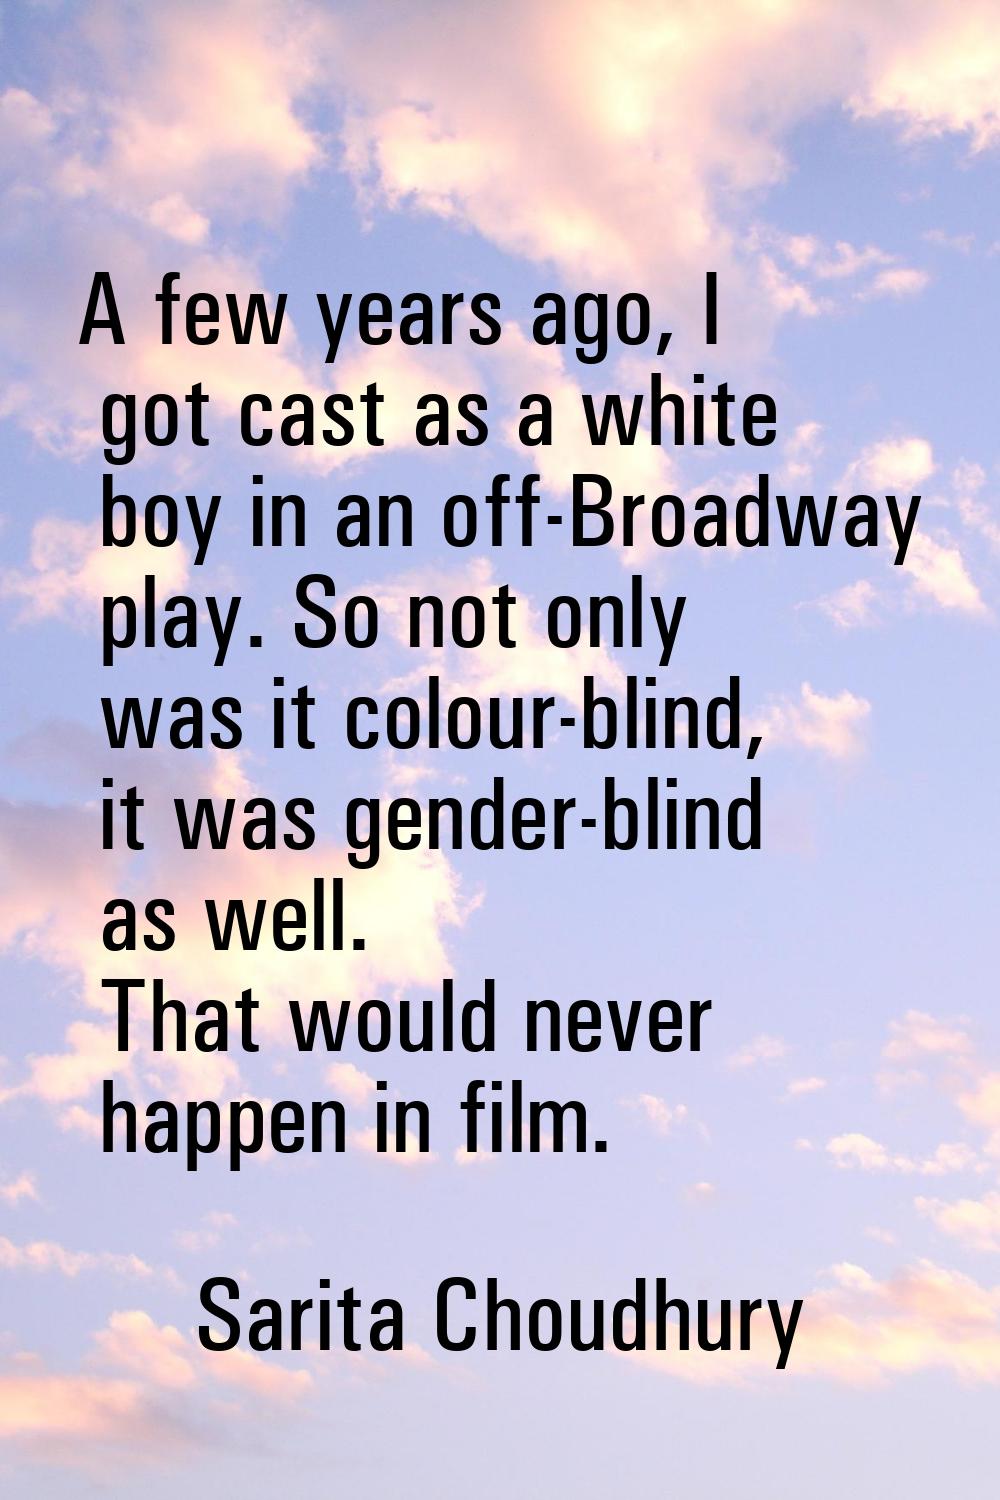 A few years ago, I got cast as a white boy in an off-Broadway play. So not only was it colour-blind